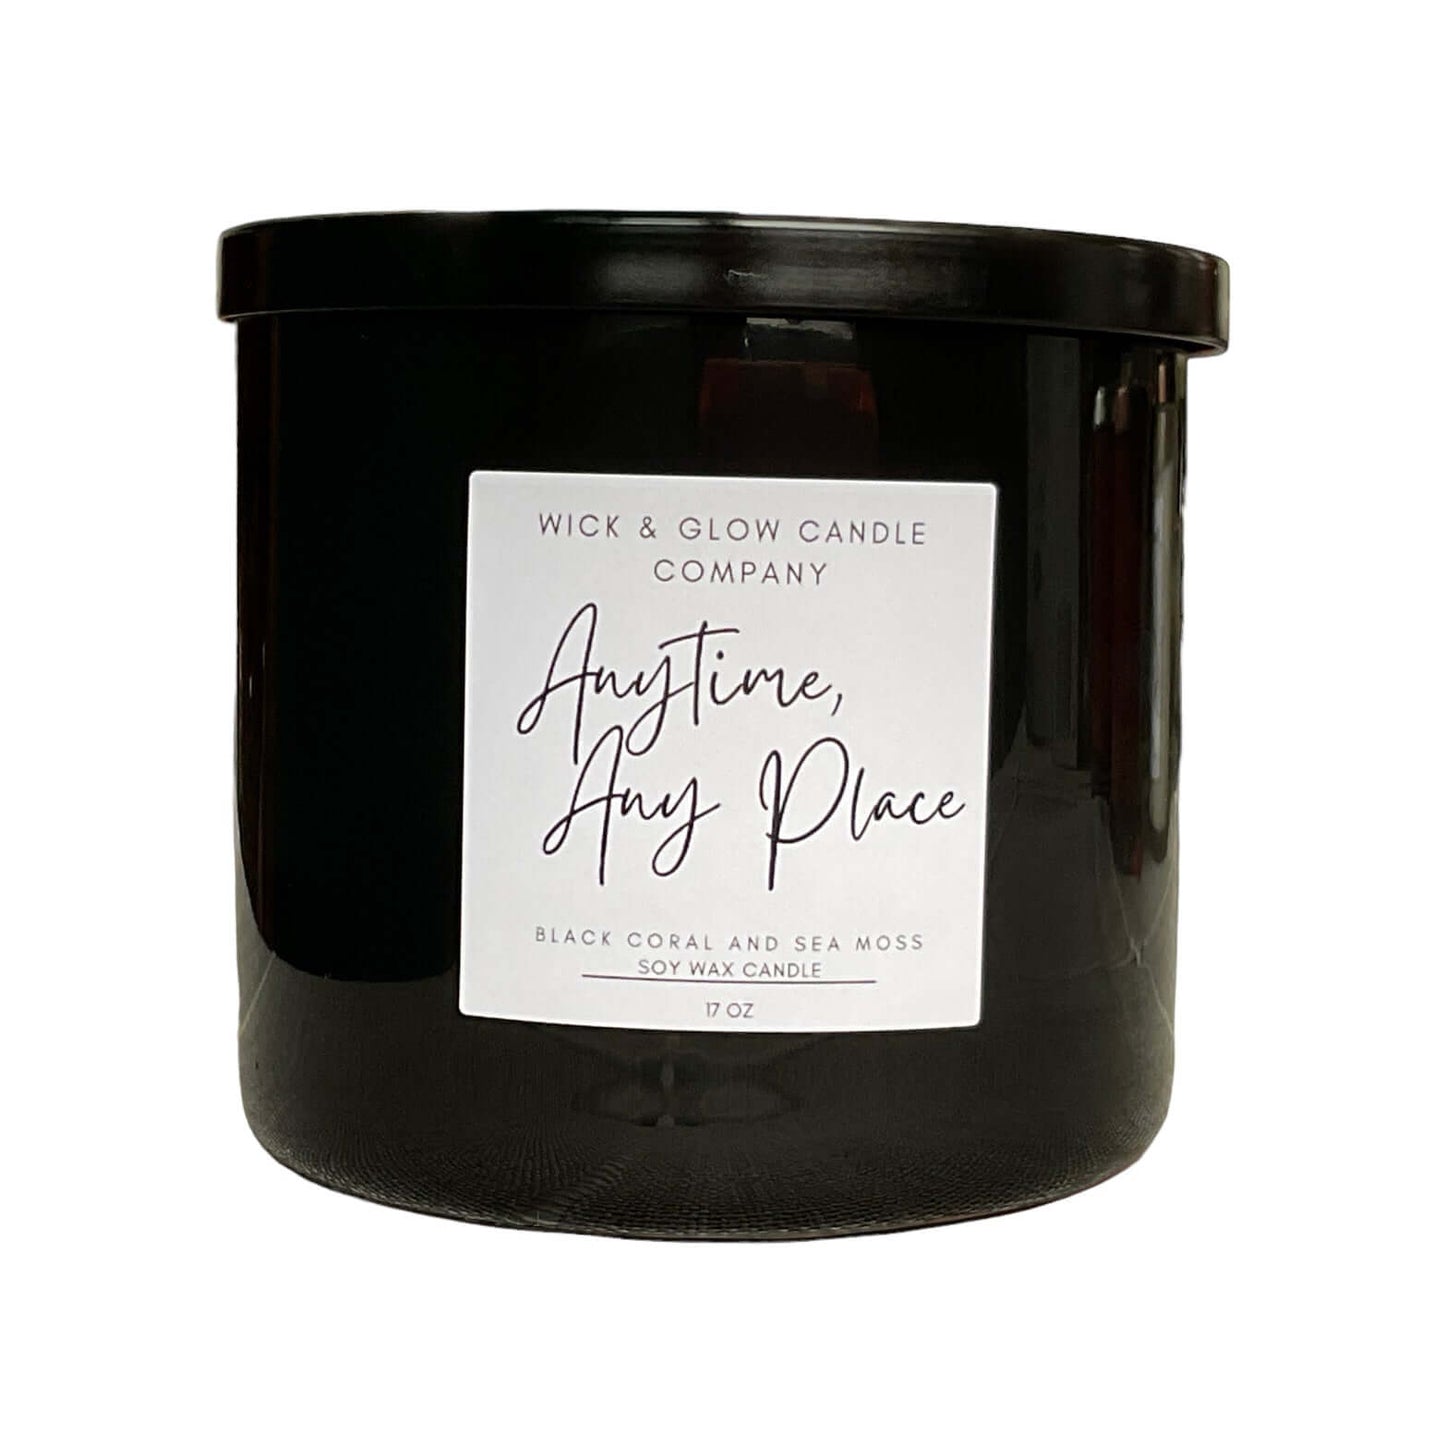 Anytime, Any Place-Black Coral and Sea Moss Scented Candle